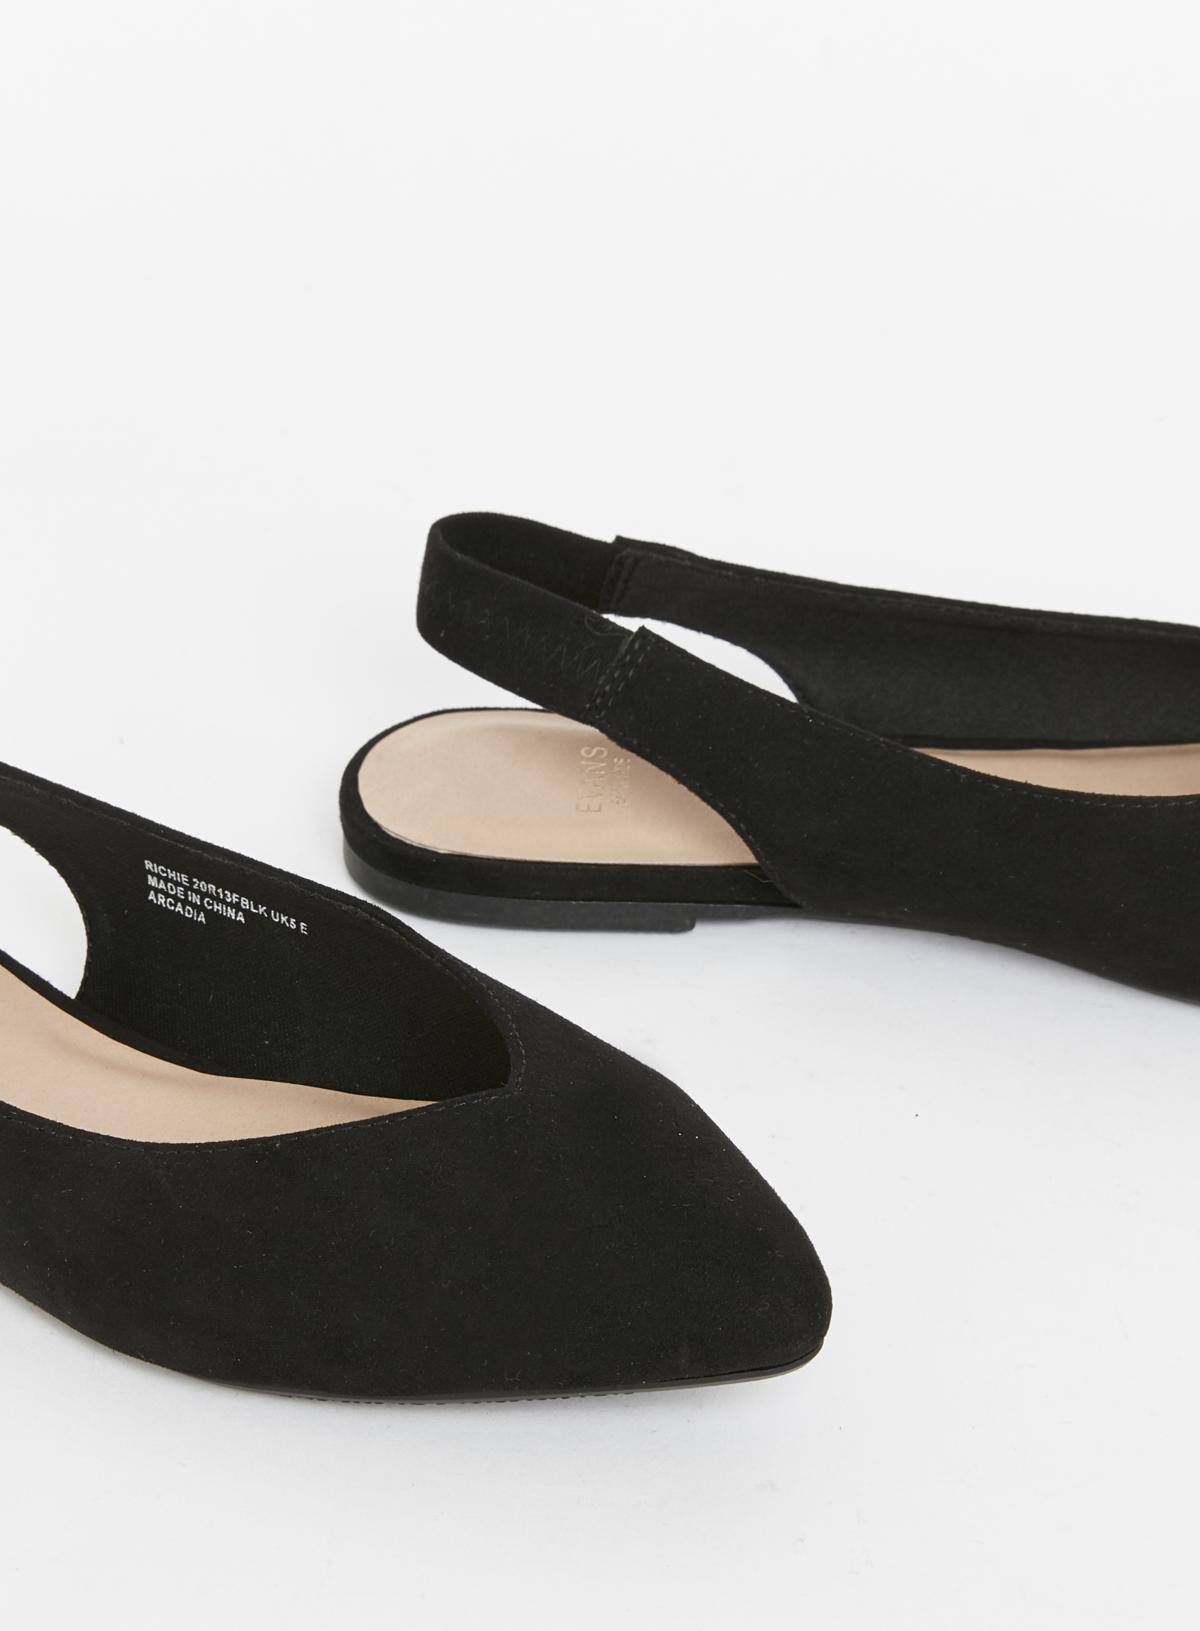 WIDE FIT Slingback Pointed Toe Flat - black 3